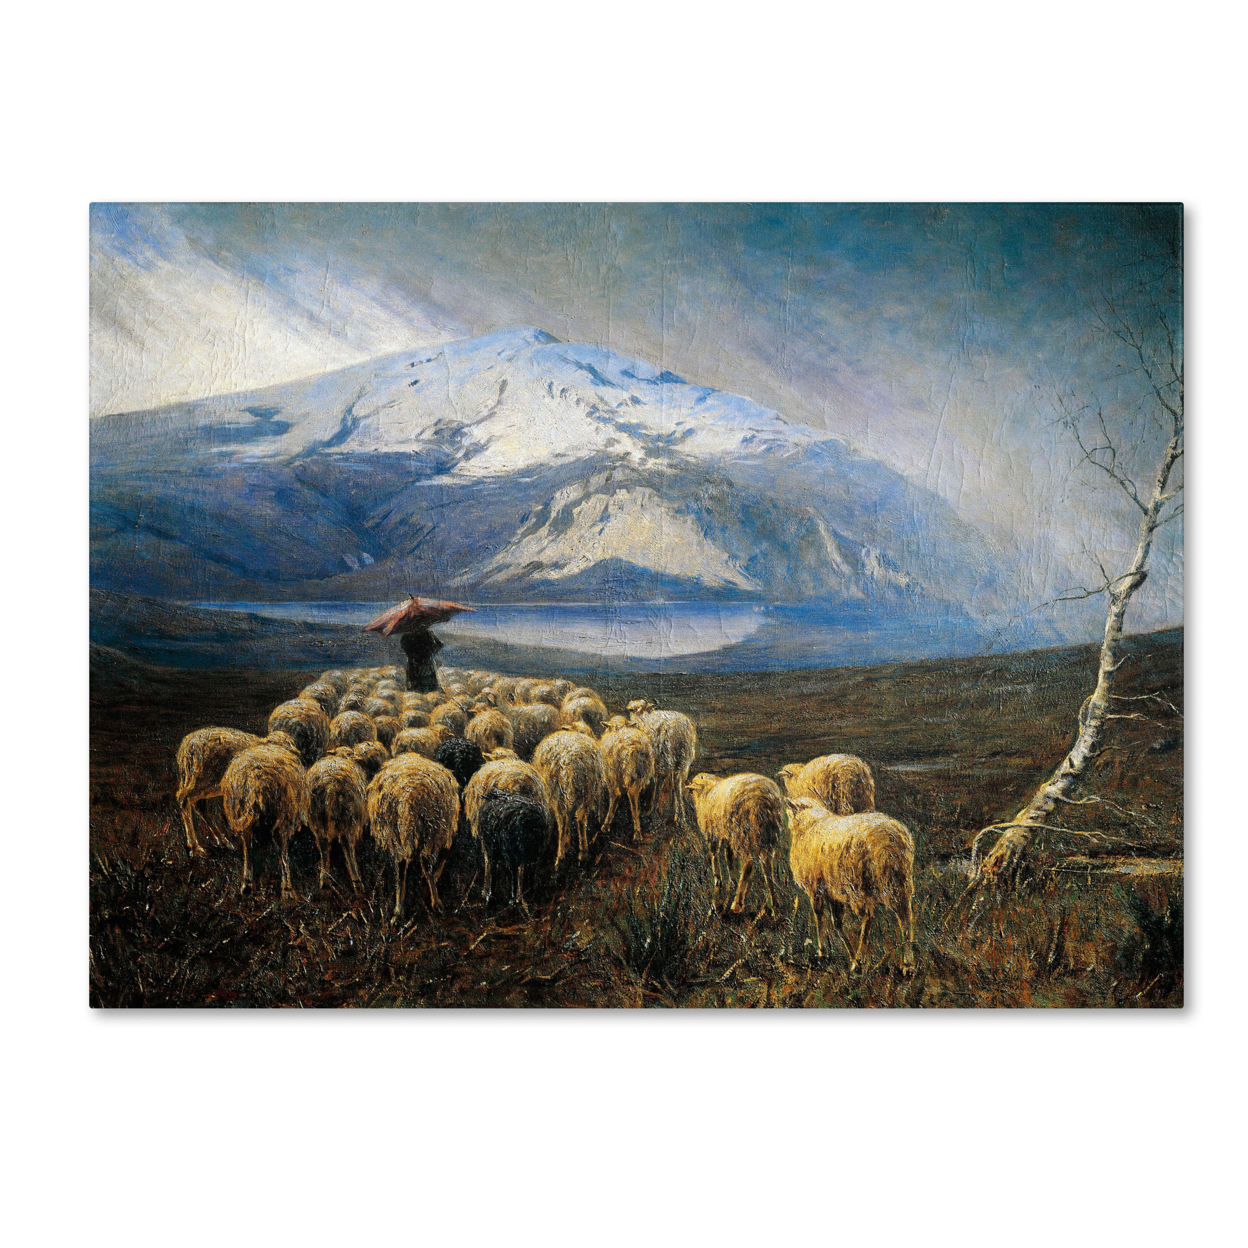 Achilles Tominetti 'Mountain Landscape With Rain' Canvas Wall Art 35 X 47 Inches